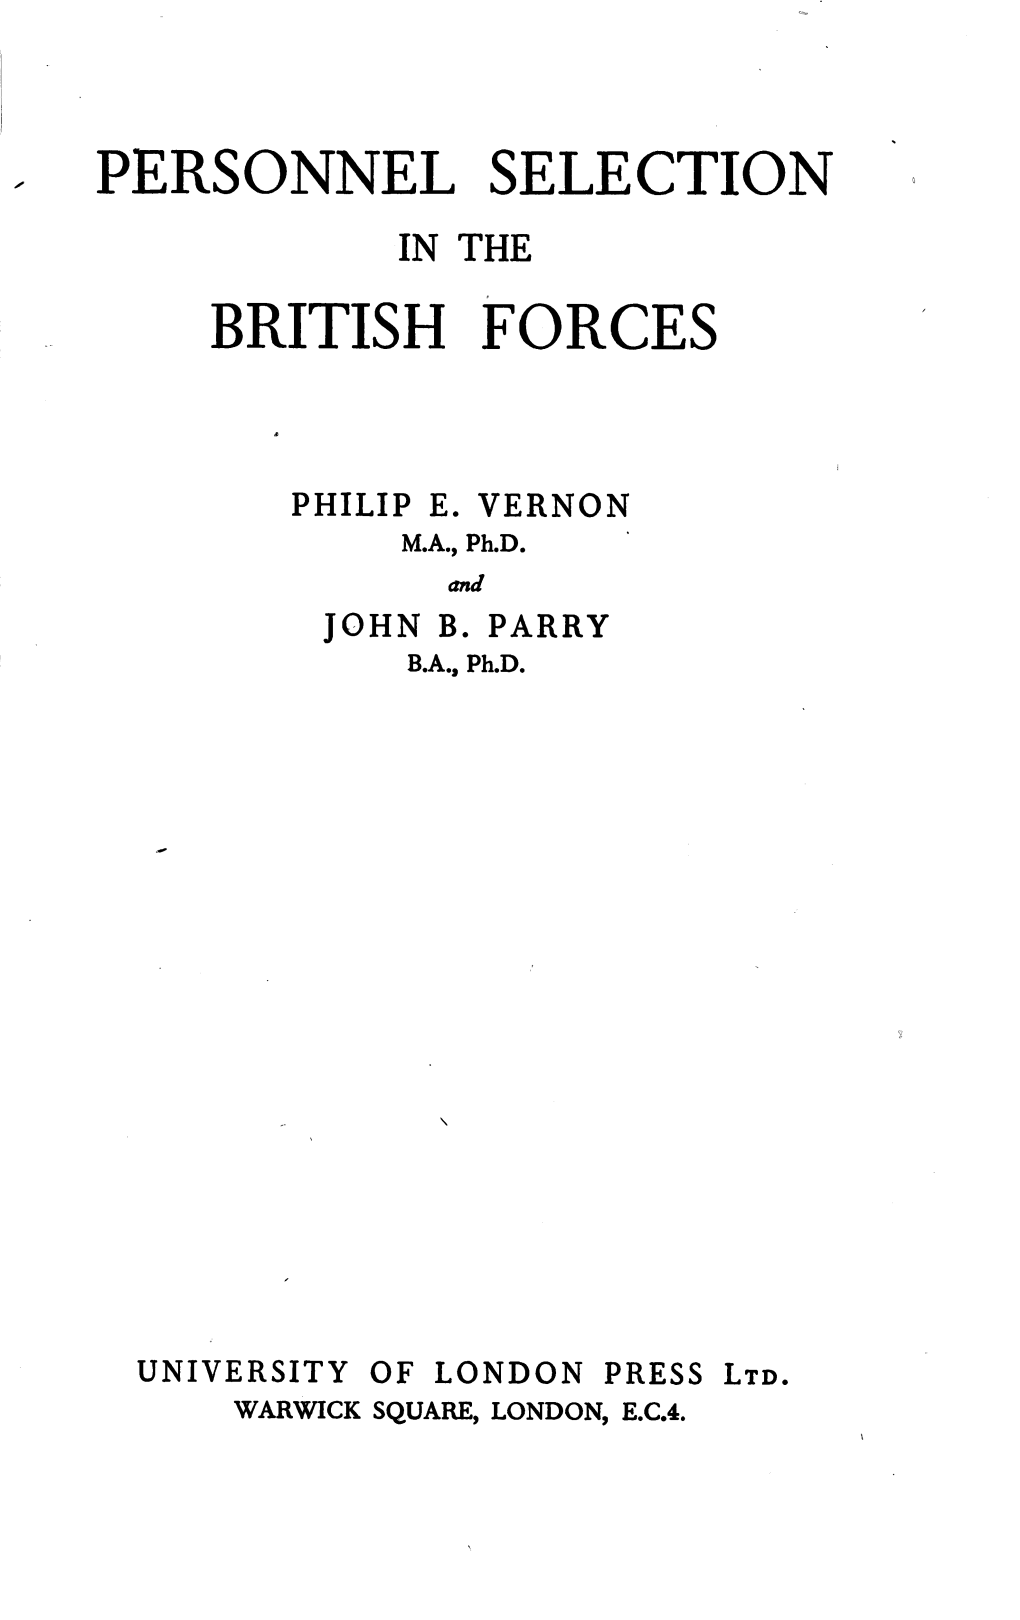 Personnel Selection in the British Forces